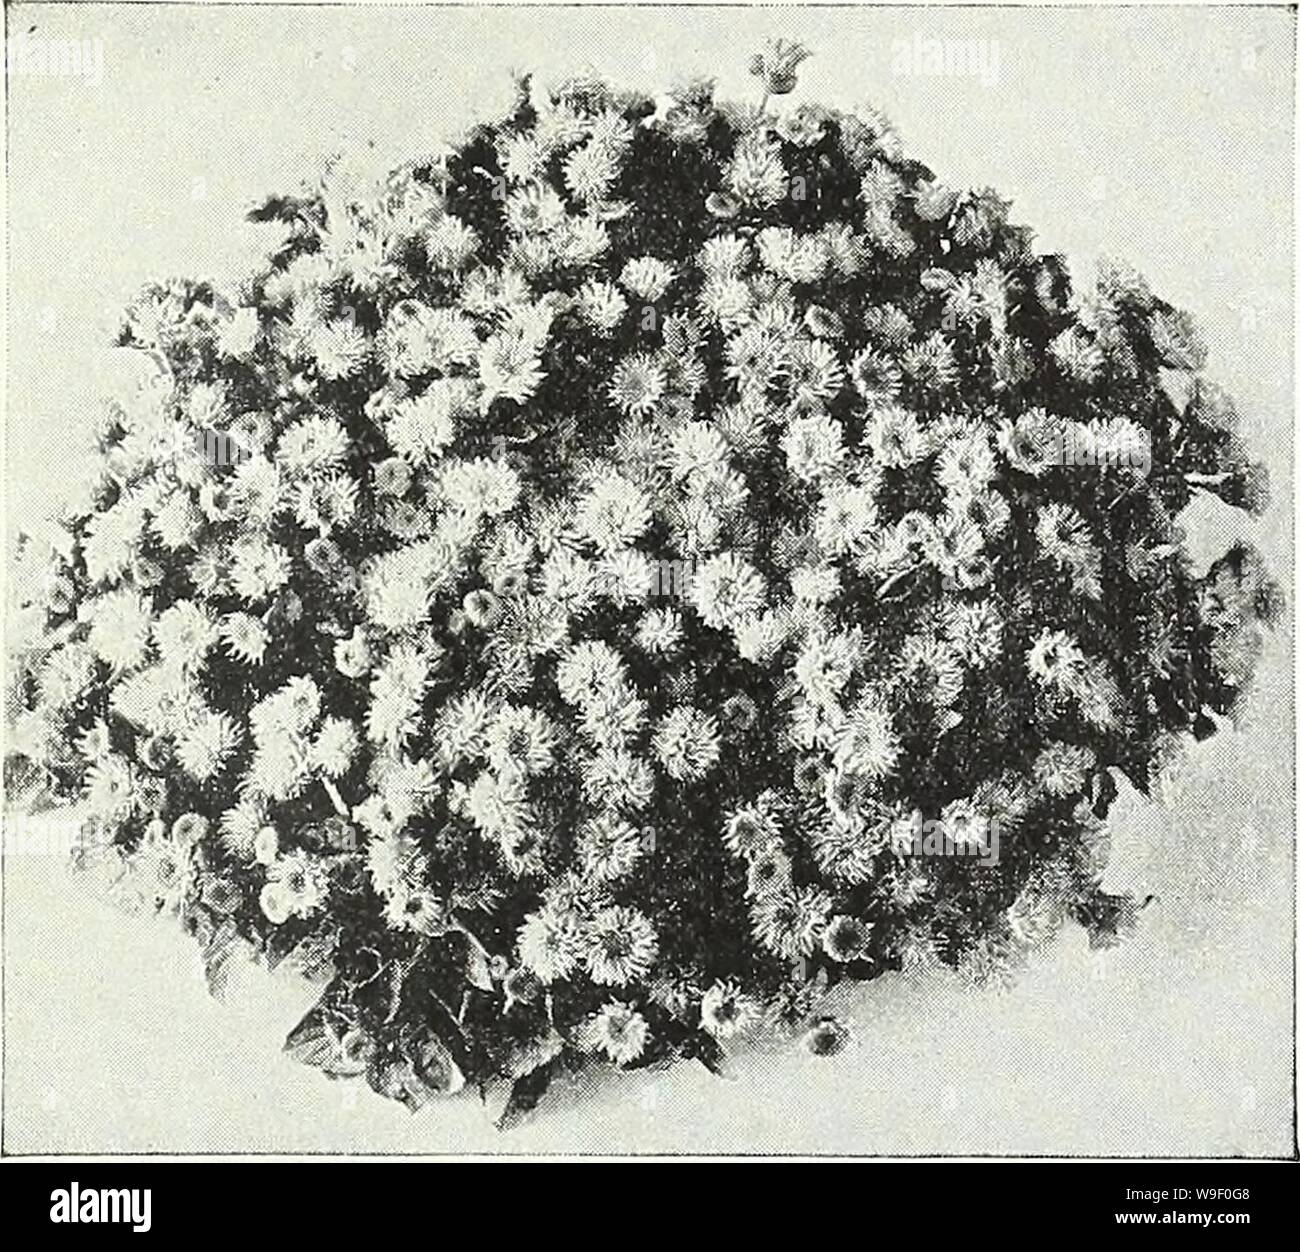 Archive image from page 6 of Currie's garden annual  62nd. Currie's garden annual : 62nd year spring 1937  curriesgardenann19curr 3 Year: 1937 ( CURRIE BROTHERS CO., MILWAUKEE, WIS Page 3 SELECT LIST of Annual Floiver Seeds THE BEST THAT UP-TO-DATE METHODS CAN PRODUCE    Ageratum, Blue Cap ABRONIA or SAND VERBENA UMBELLATA GRANDIFLORA—A quick-growing, trail- ing annual which is excellent for growing in baskets, the rockery, or in the open border. Pkt. 10c ADONIS Showy plants in almost any location, remaining a long time in bloom in partially shady places. AESTIVALIS (Flos Adonis)—A hardy annua Stock Photo